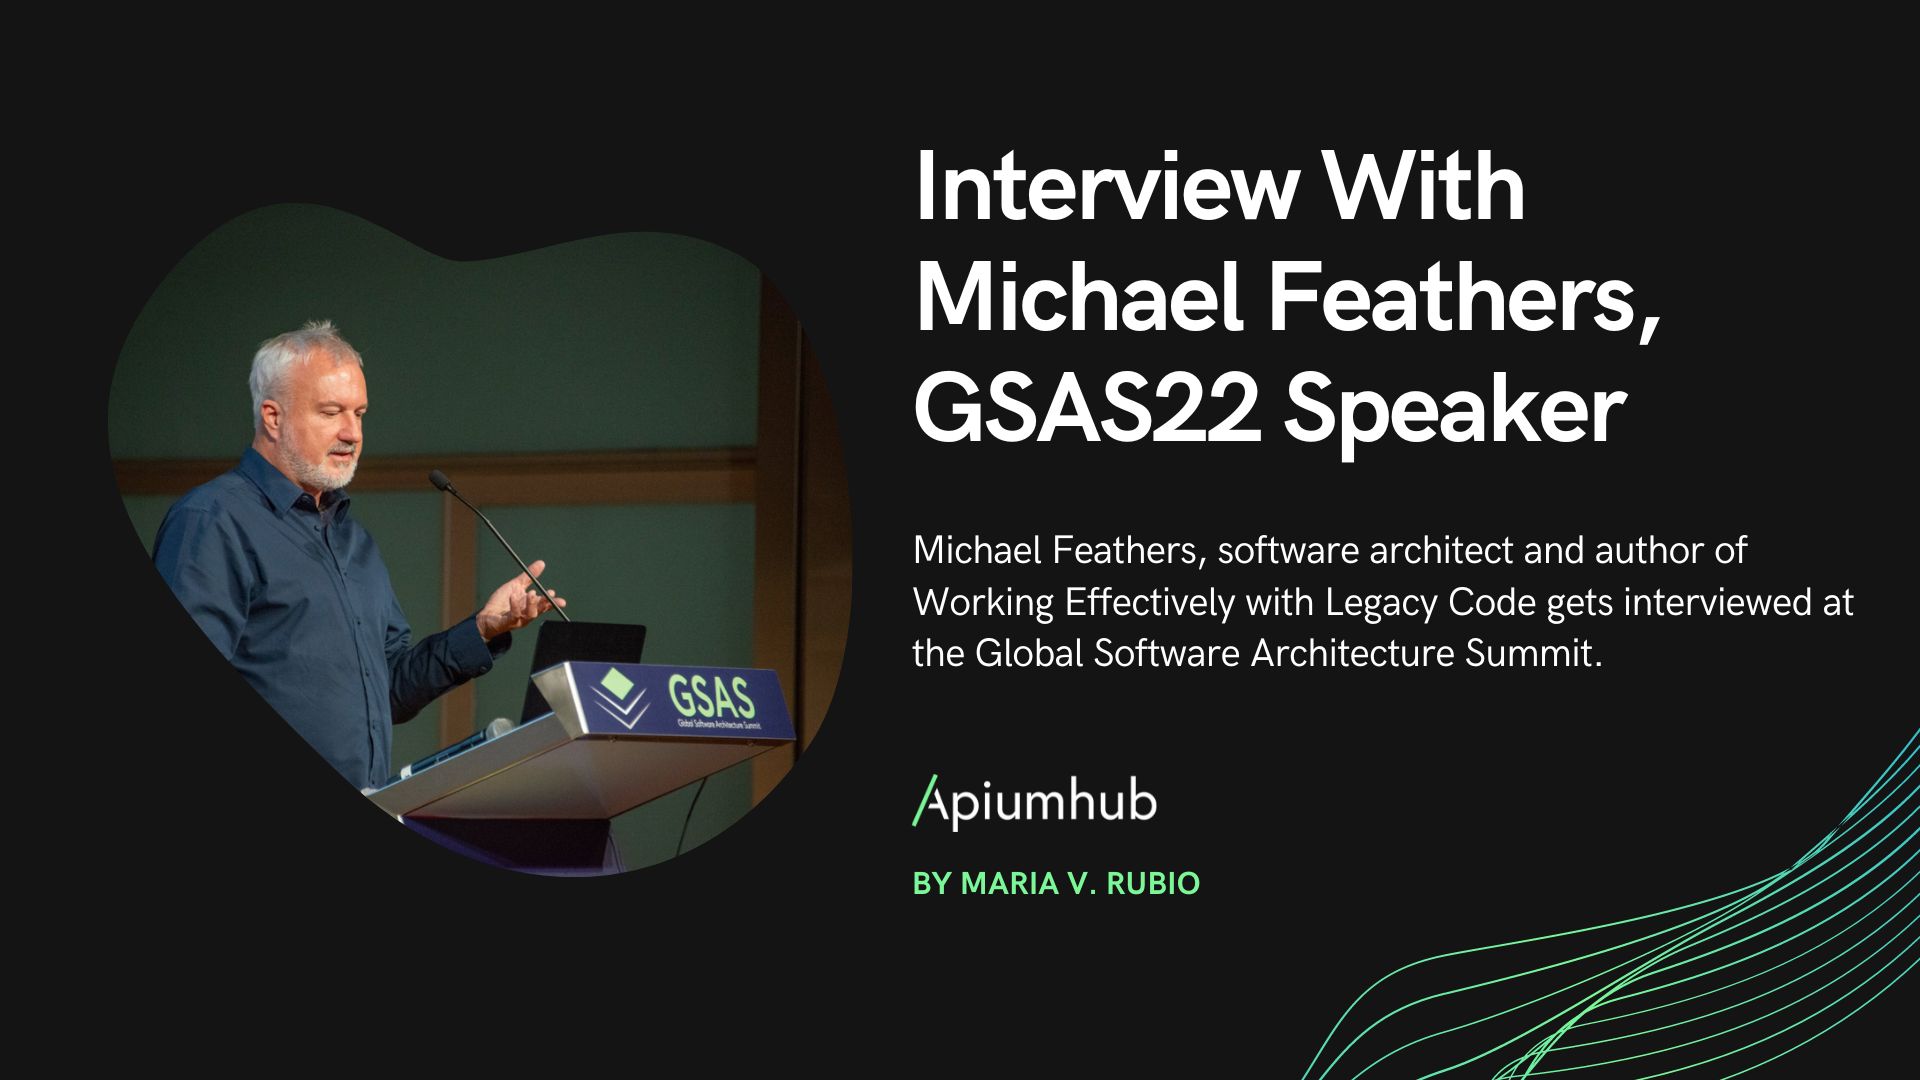 Interview with Michael Feathers, GSAS 22 speaker